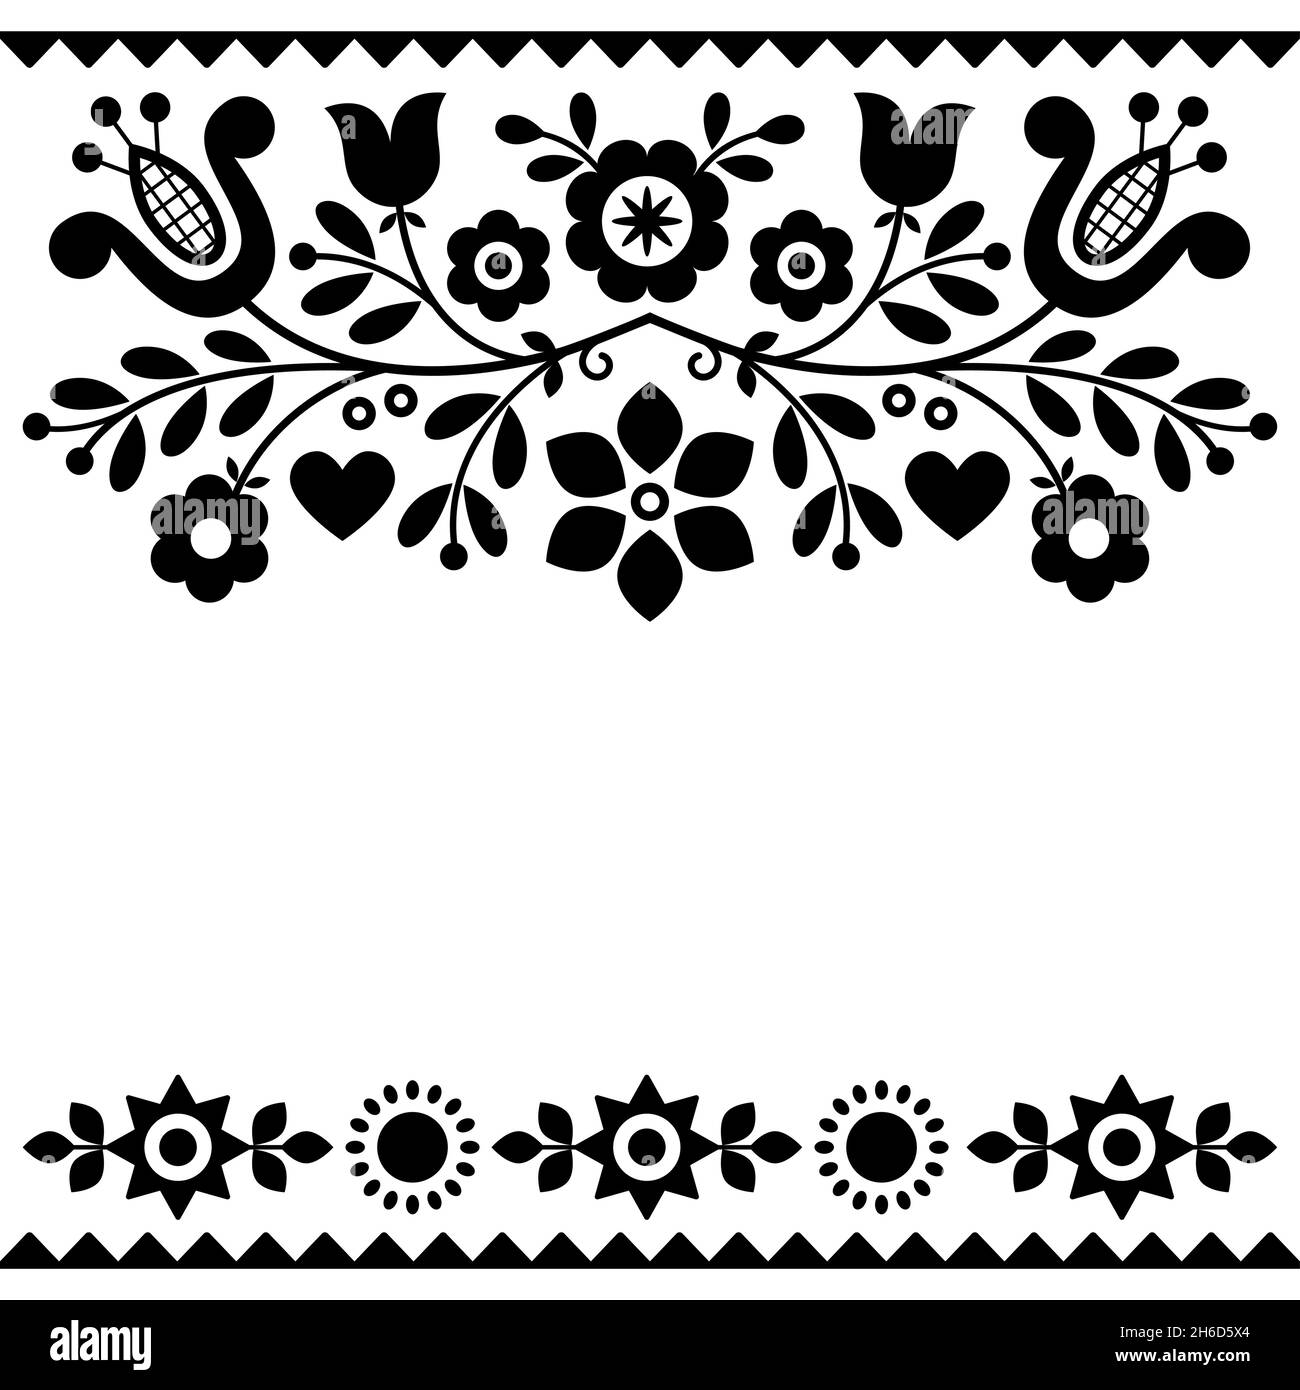 Floral design with flowers and hearts perfect for Valentine's Day greeting card or wedding invitation - Polish black and white folk art decor Stock Vector